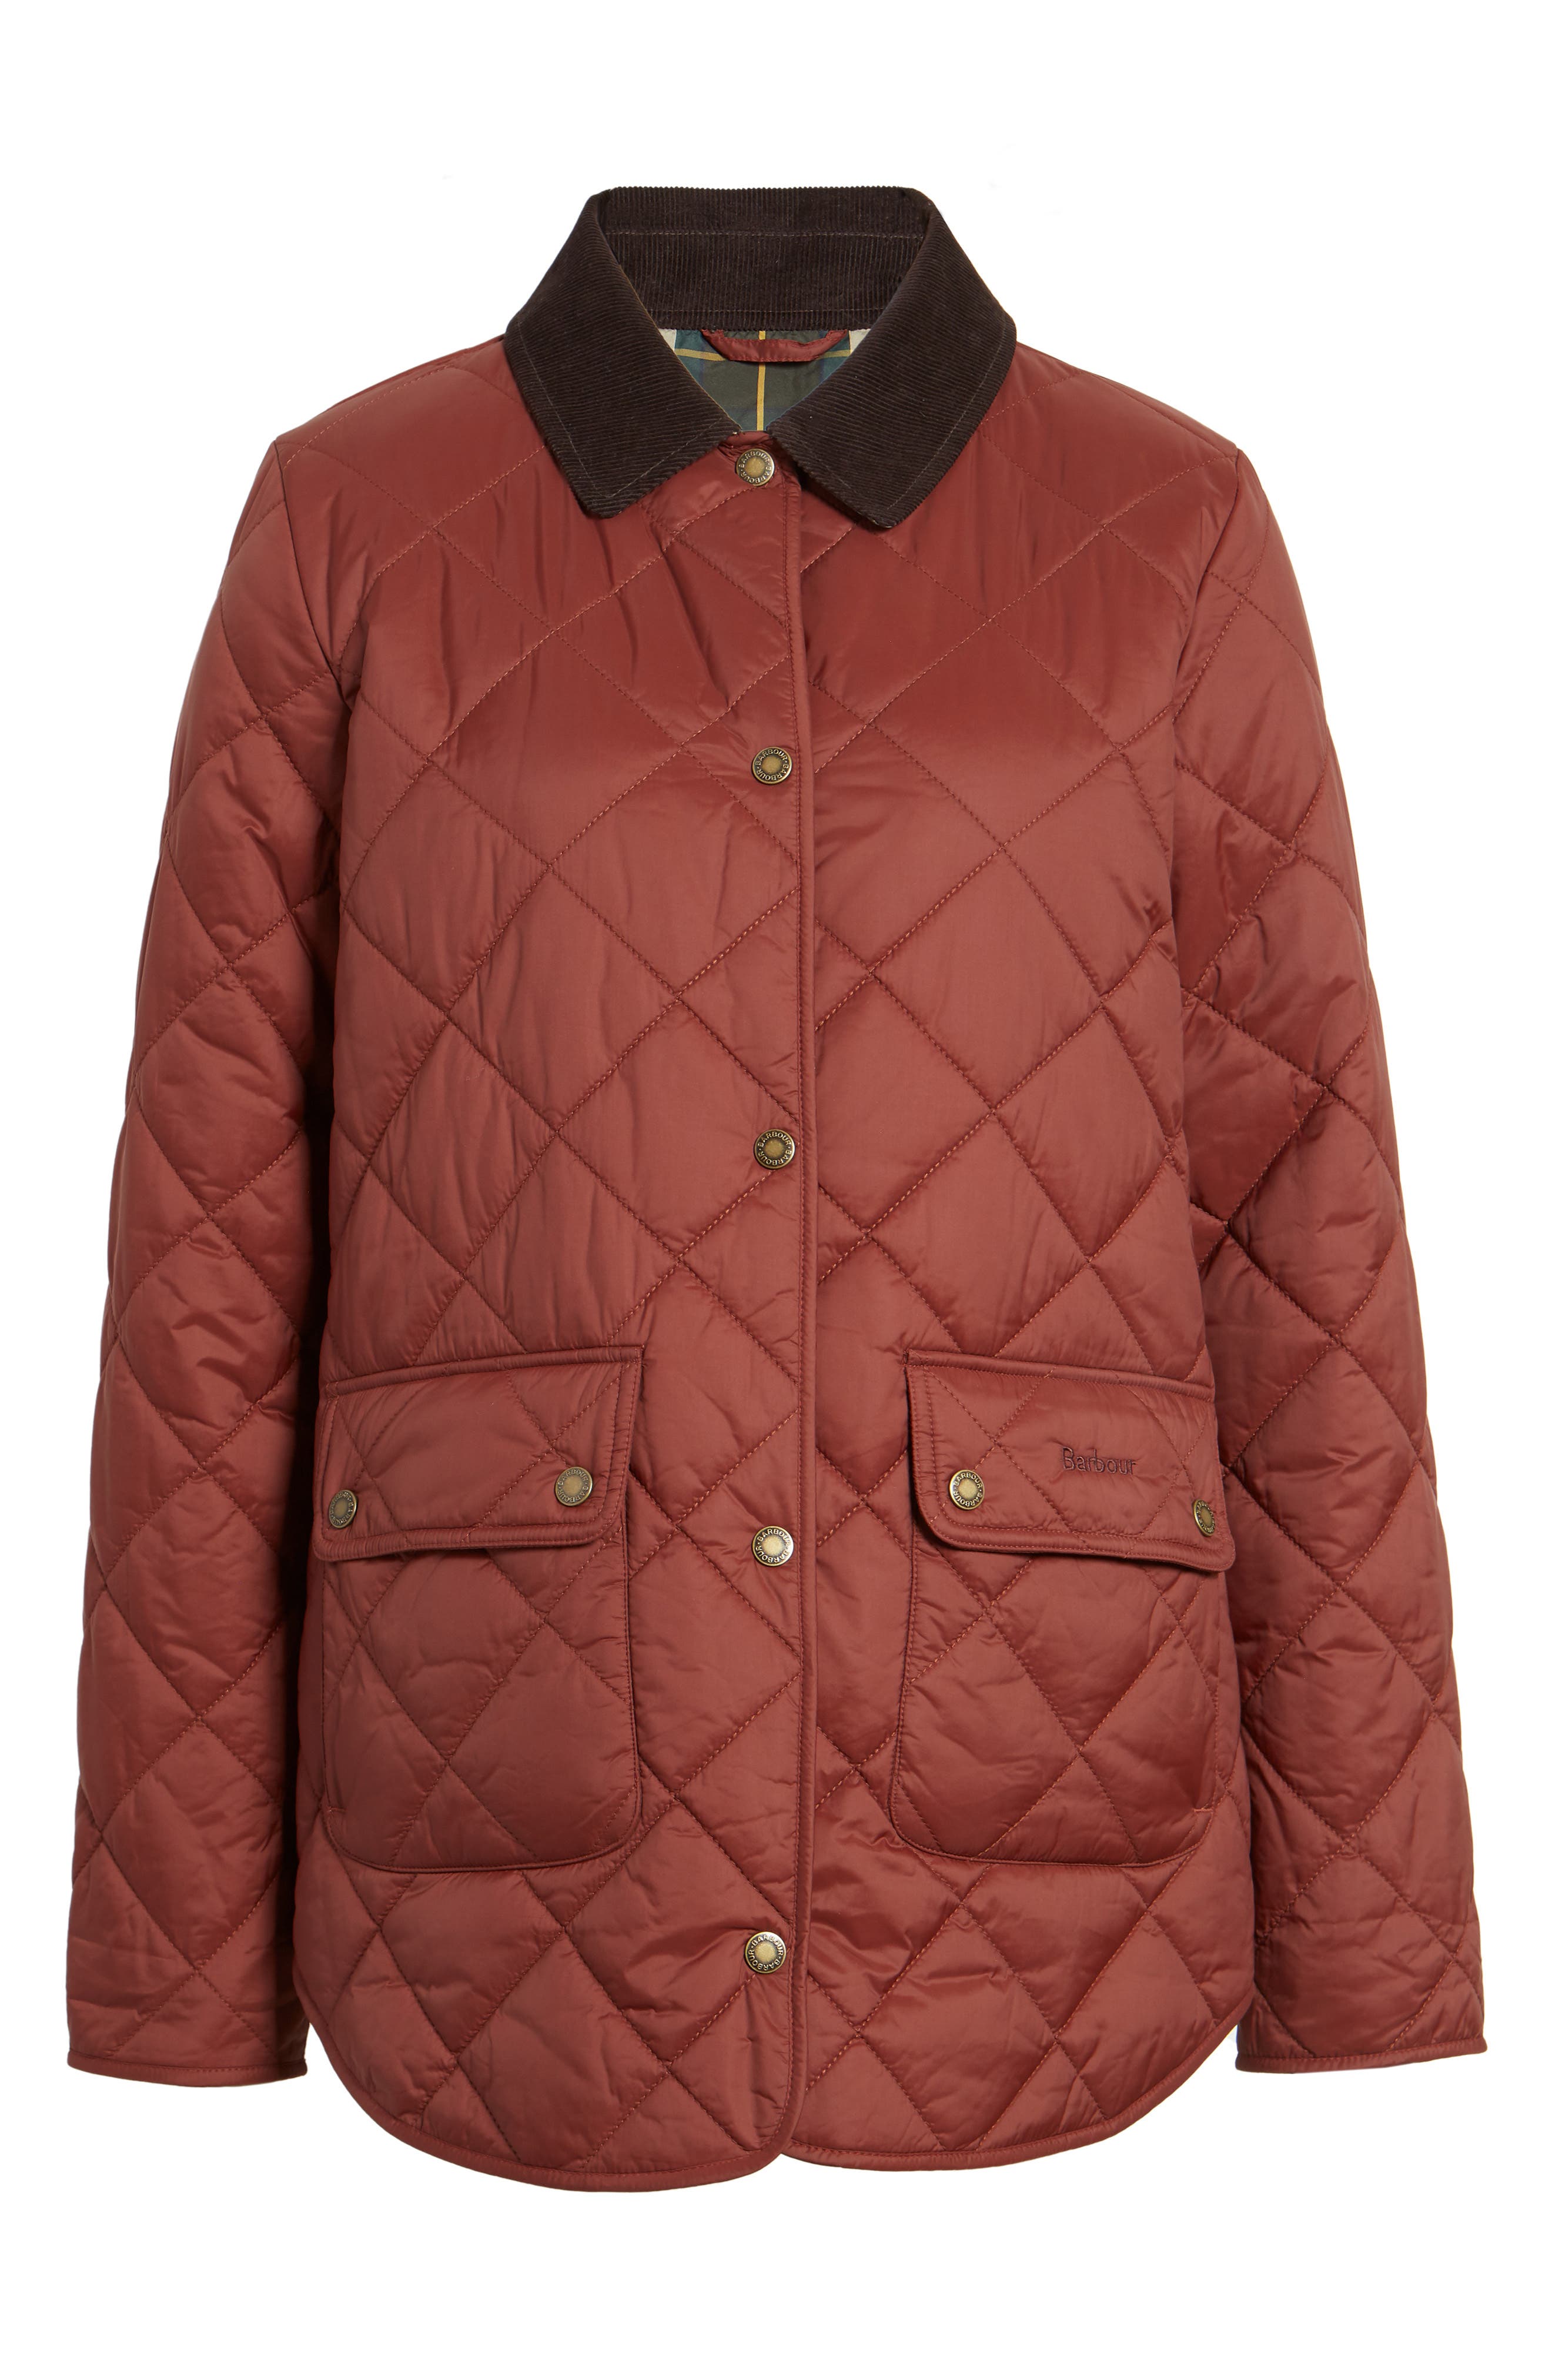 wash barbour quilted jacket